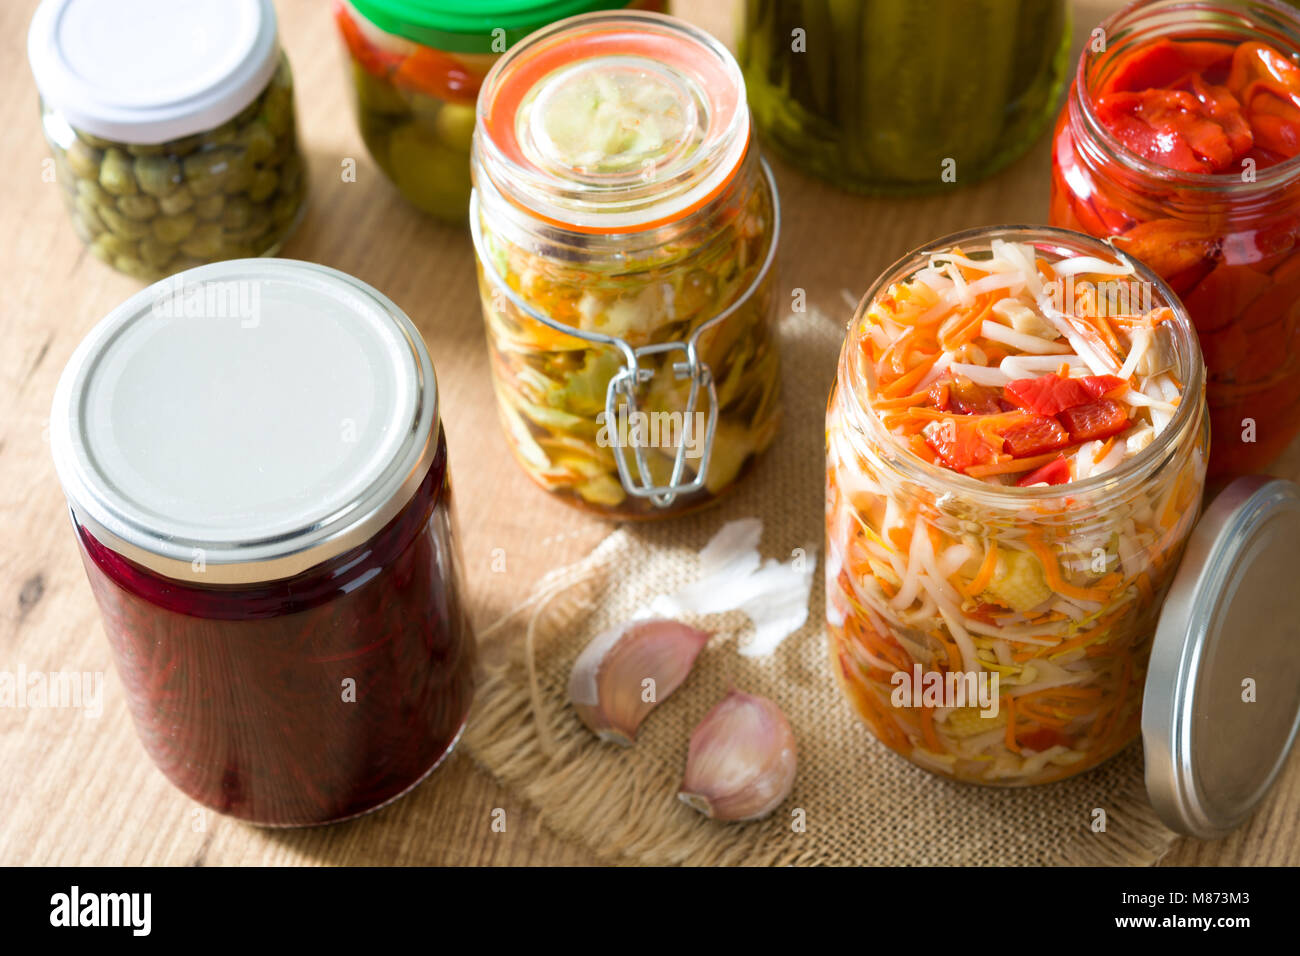 Fermented preserved vegetables in jar on wooden table. Stock Photo